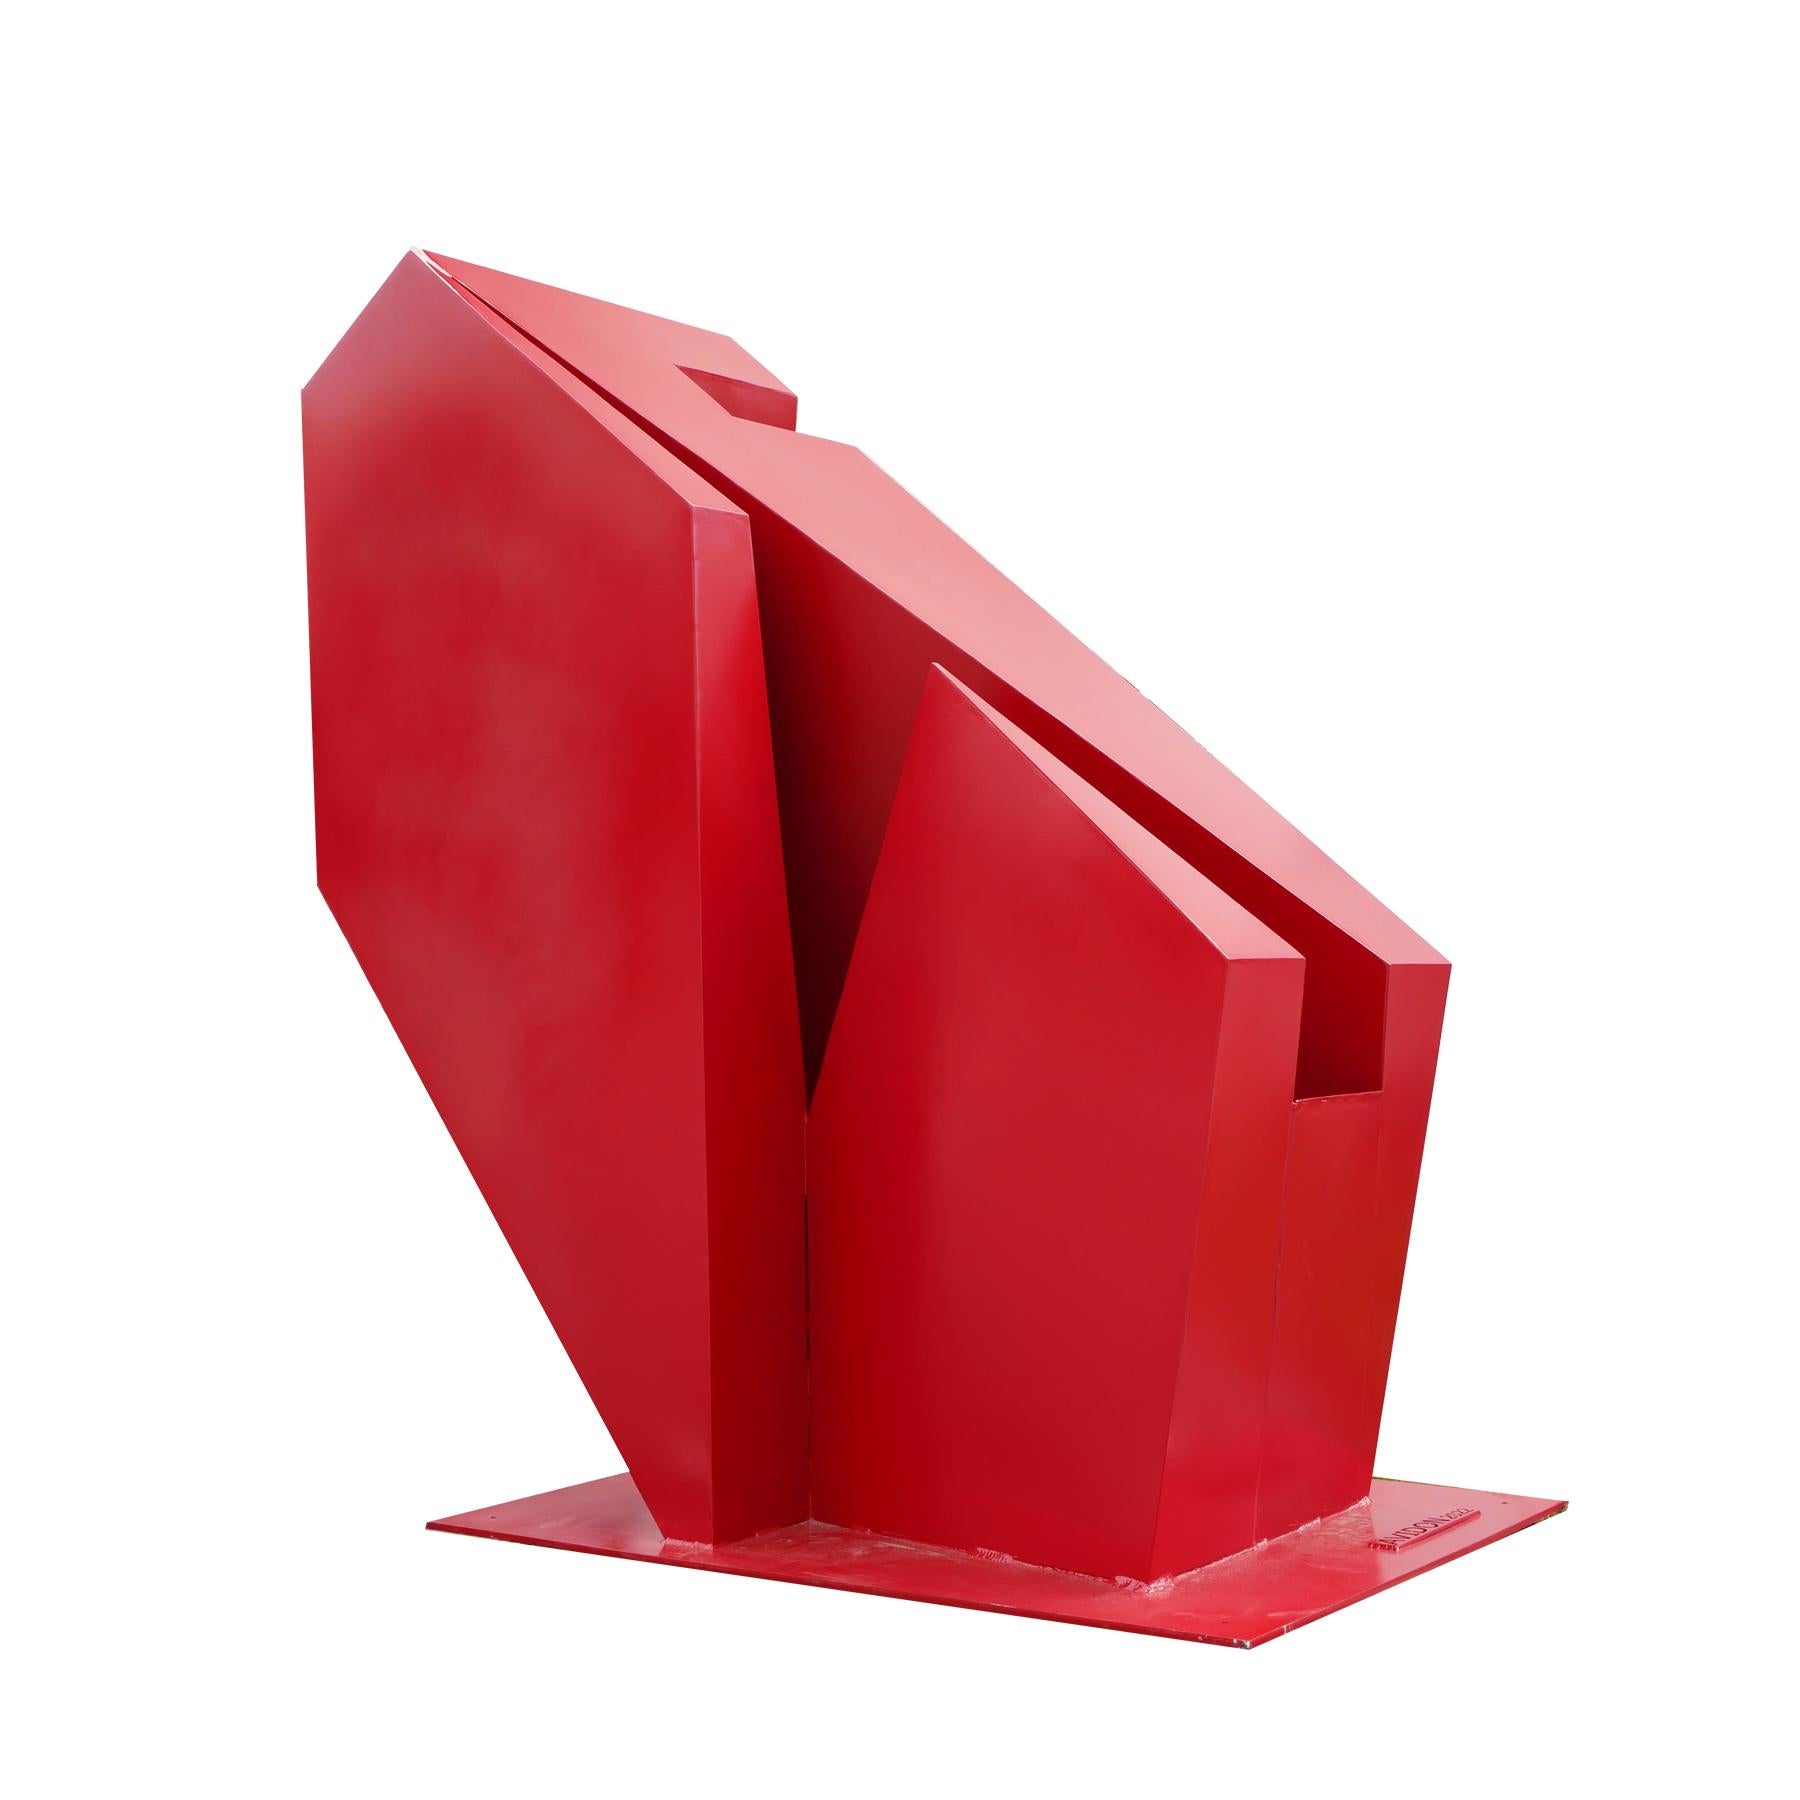 Large red custom-made geometric sculpture by Scott Avidon. This angular sculpture was fabricated and made for Reeves Art and Design and is a new contemporary piece that is now in their collection. Made out of steel and powder-coated in a bright red